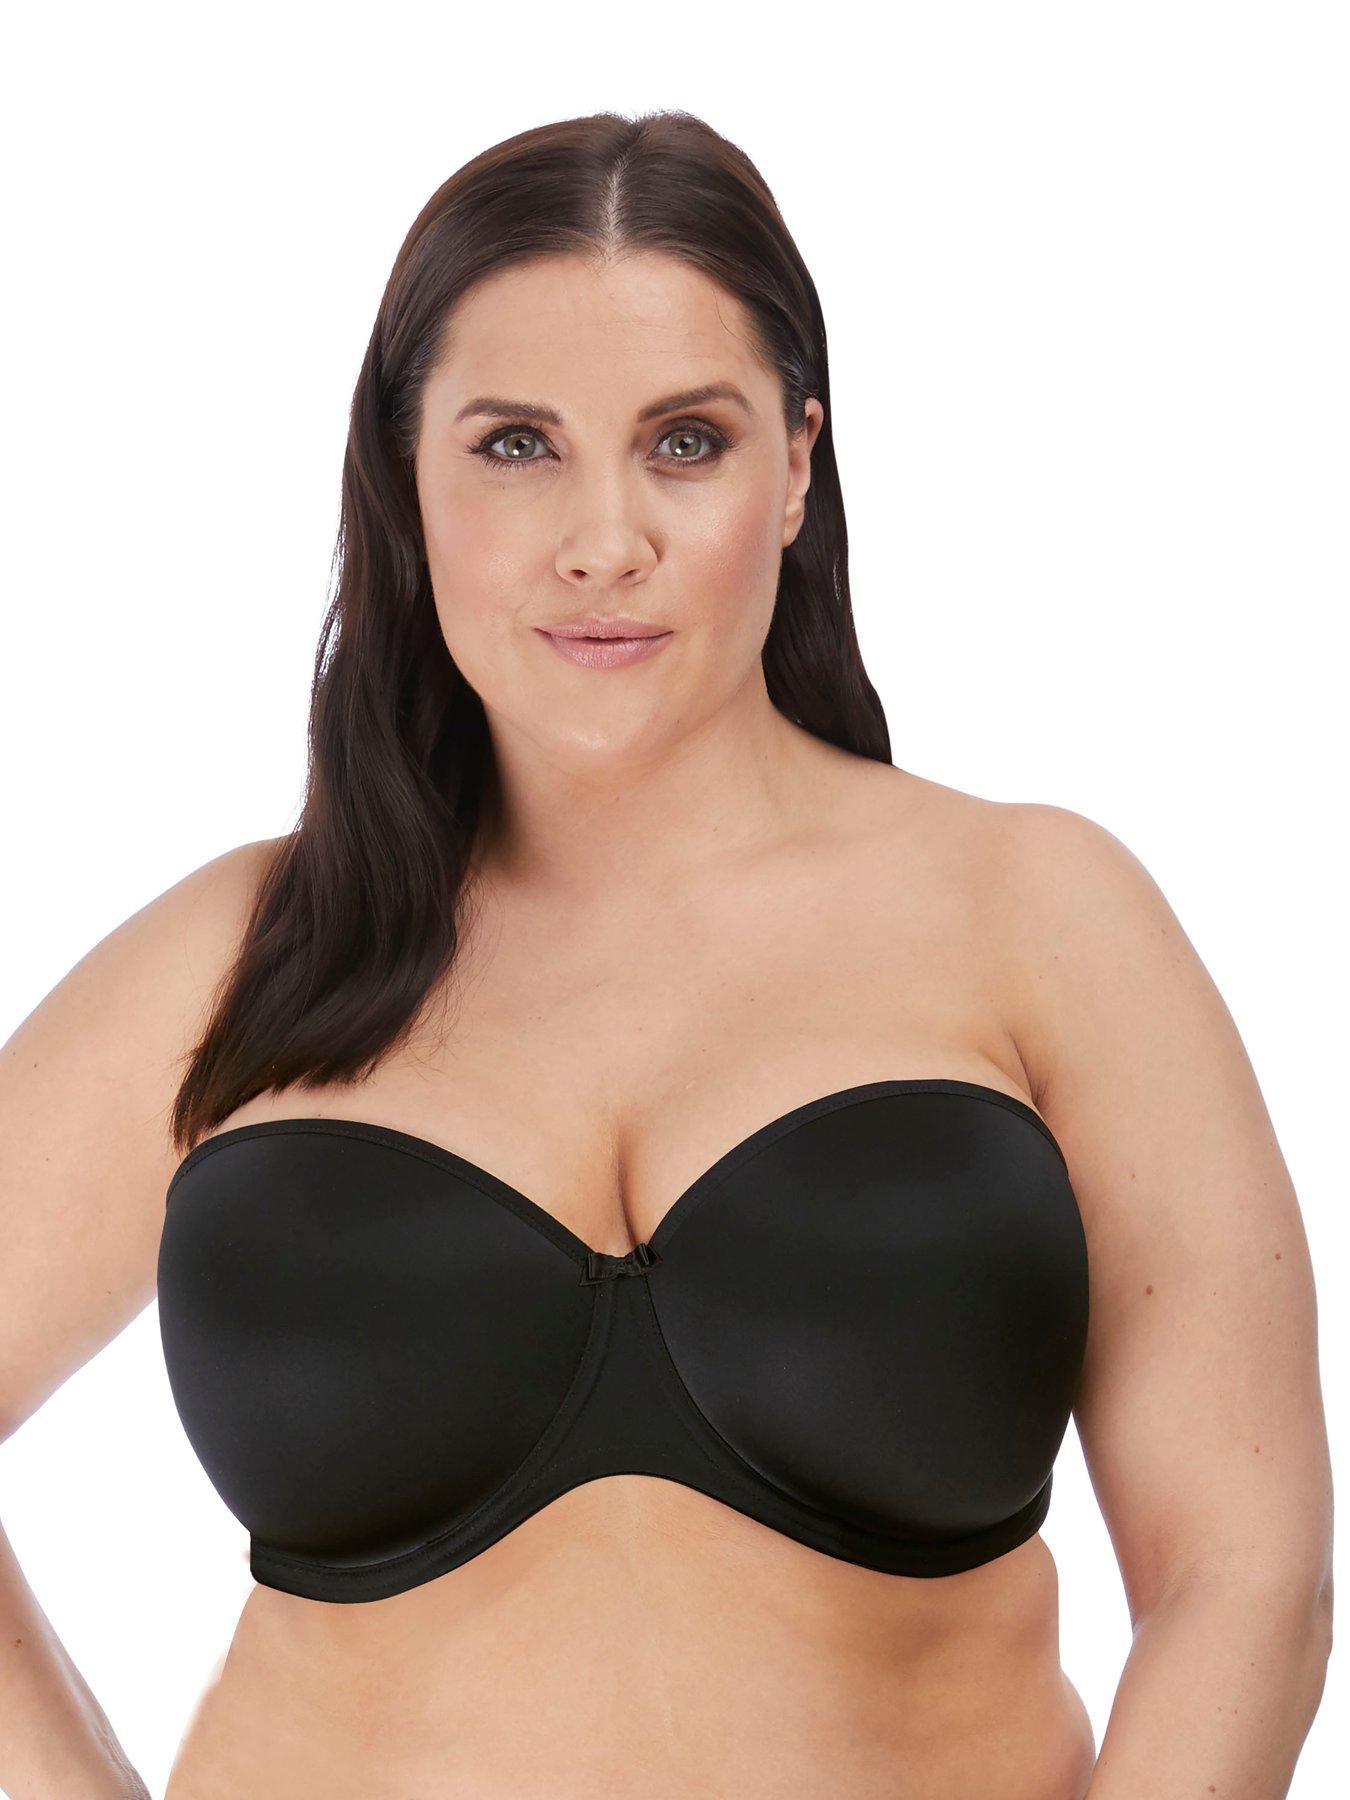 44dd T Shirt Bra - Get Best Price from Manufacturers & Suppliers in India